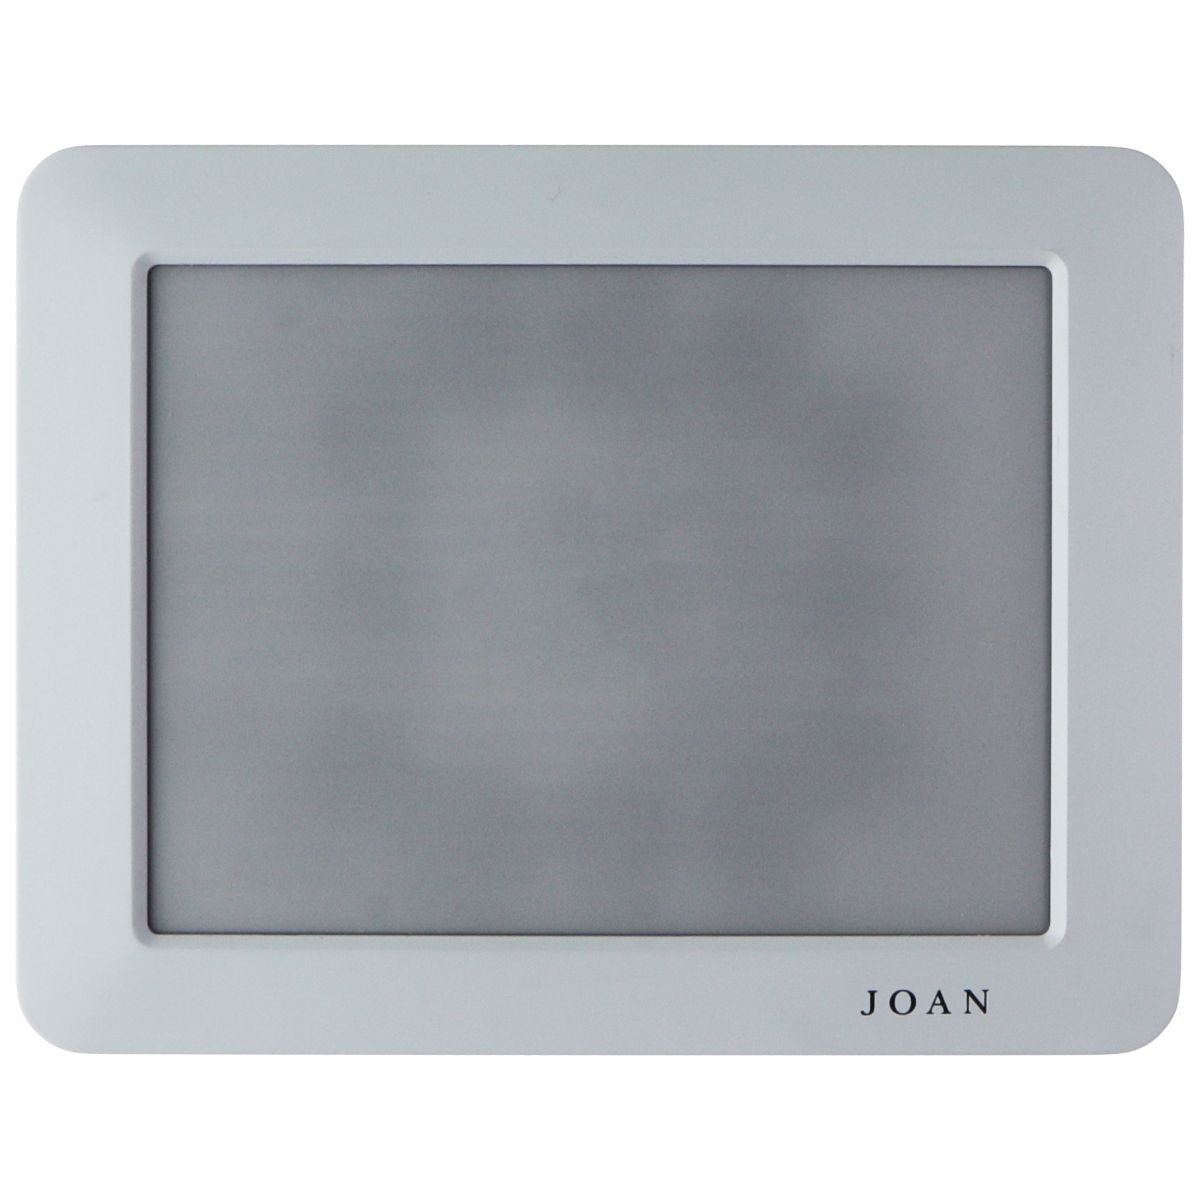 JOAN 6 Meeting Room Booking and Management Device - Gray iPads, Tablets & eBook Readers JOAN 6    - Simple Cell Bulk Wholesale Pricing - USA Seller